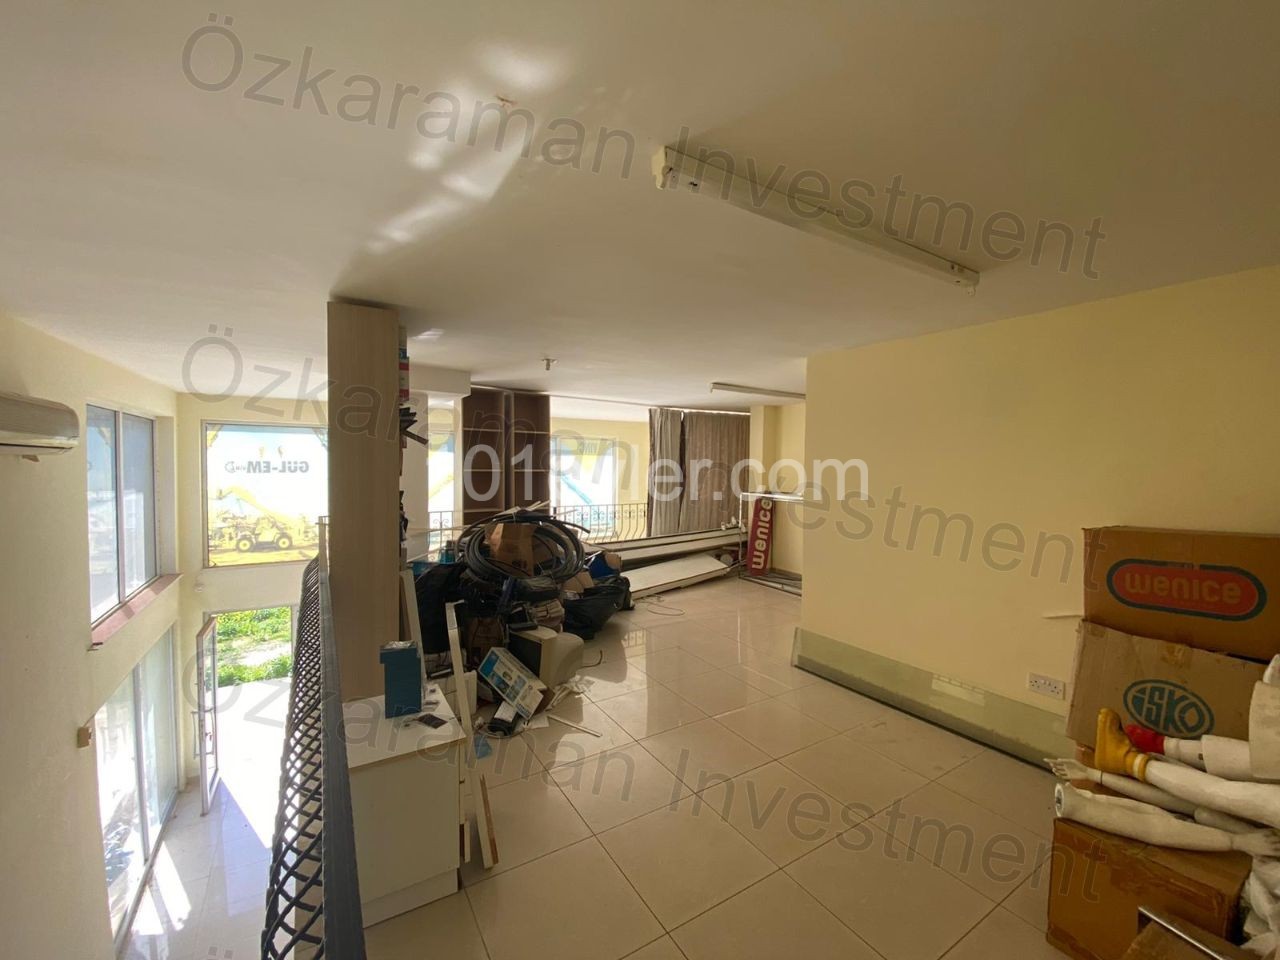 90m2 workplace for sale in the center of Famagusta from OZKARAMAN ** 